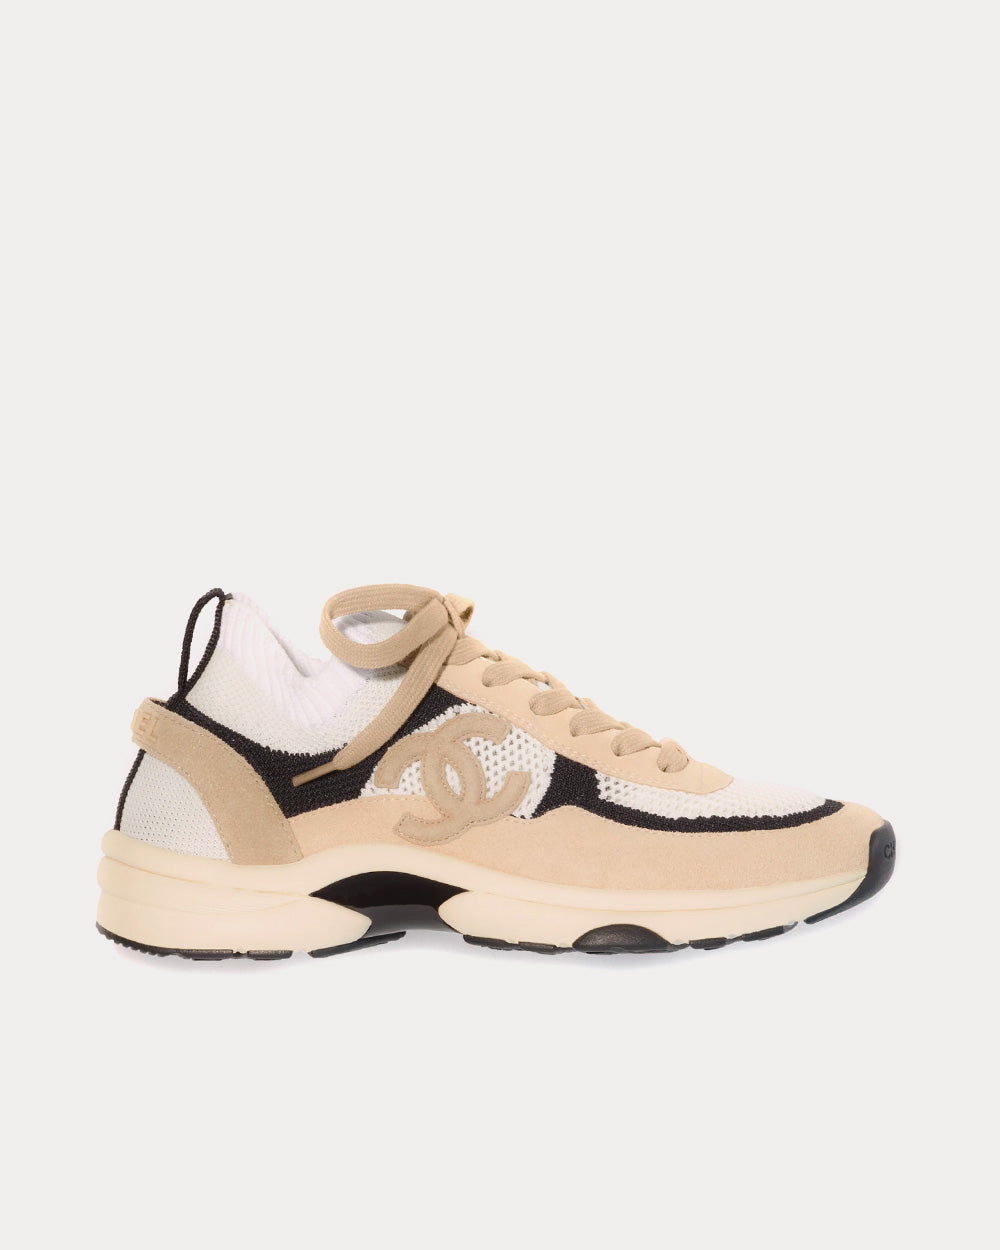 Sneakers - Knit & suede calfskin, ivory — Fashion | CHANEL